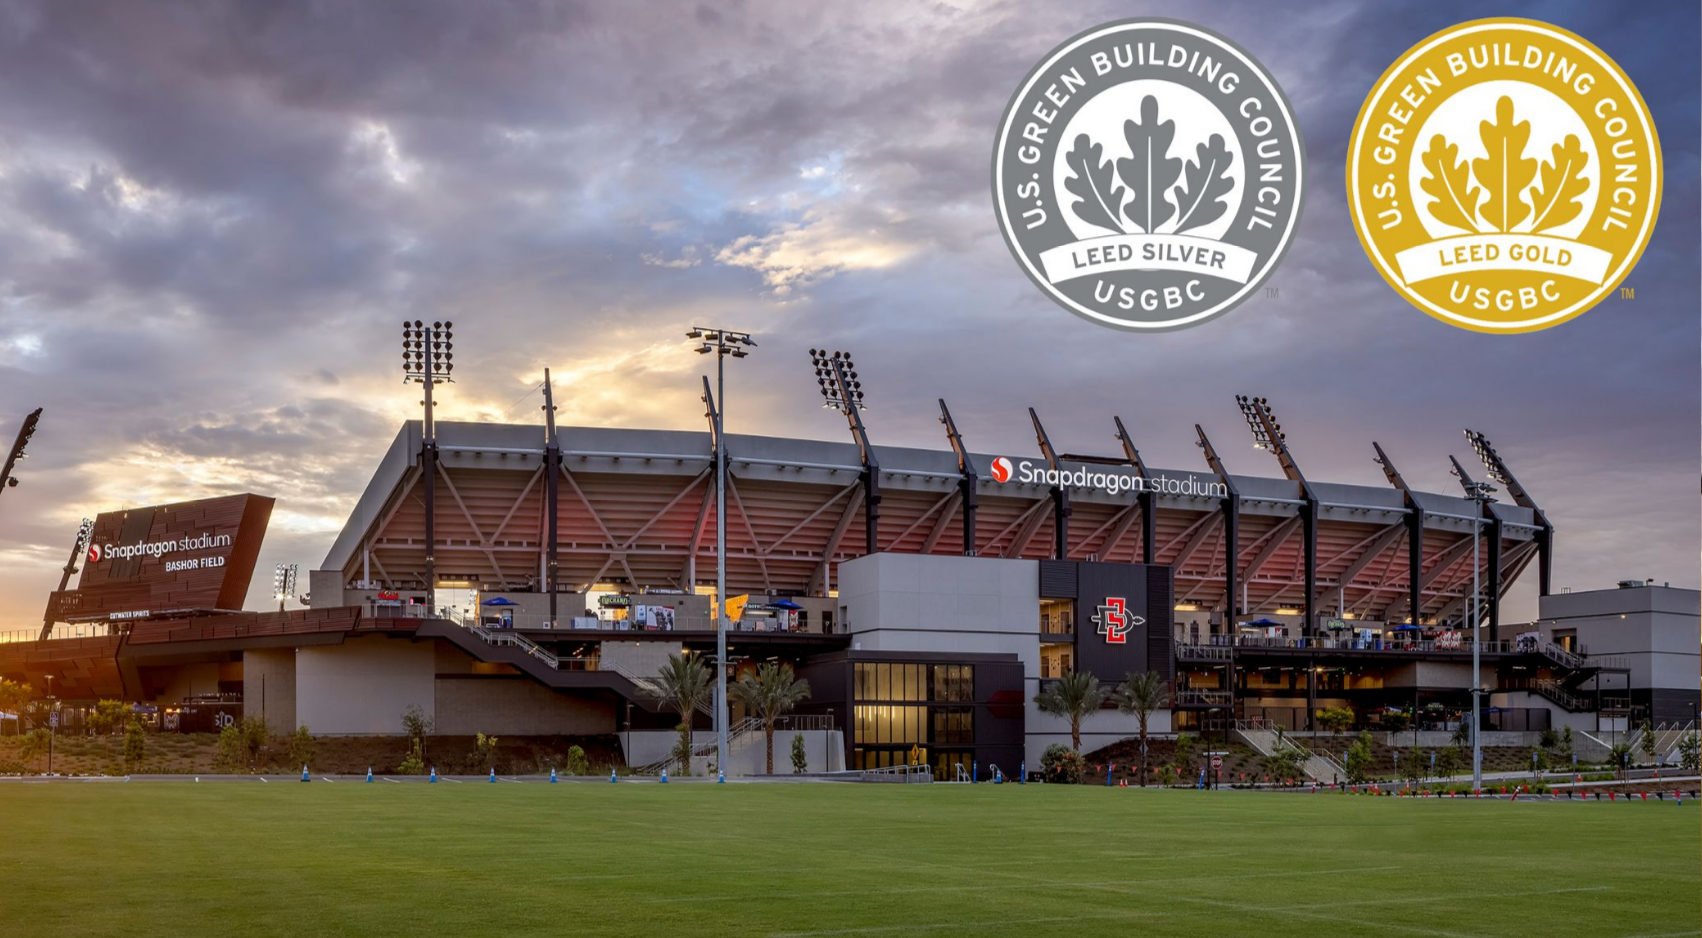 Snapdragon Stadium (pictured) and SDSU Mission Valley were awarded Leadership in Energy and Environmental Design (LEED) certifications. (Image courtesy of Oak View Group)